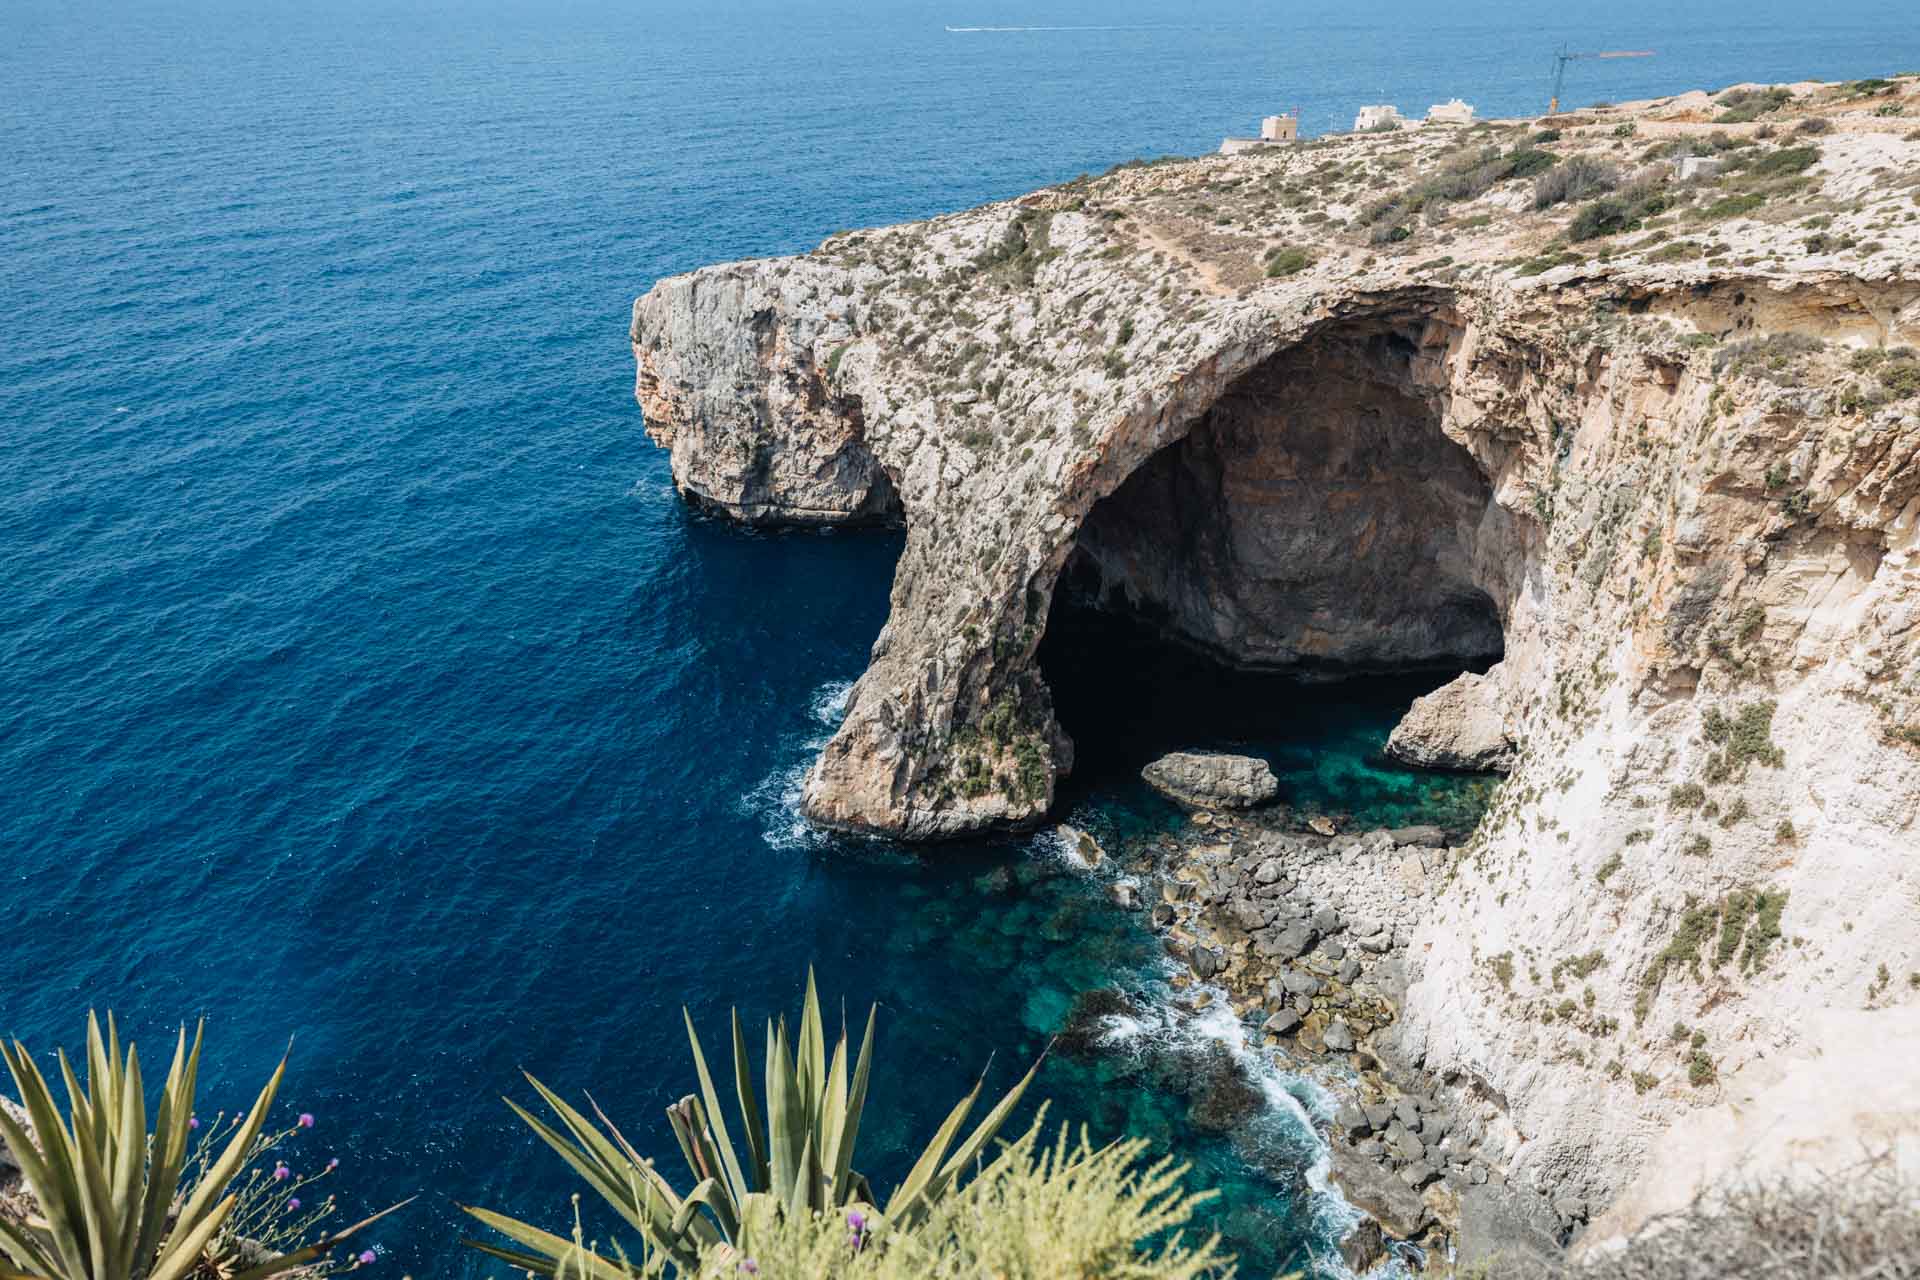 things to do in malta, places to visit in Malta, things to do on Malta, malta attractions, malta tourist attractions, best places to visit in malta, activities in malta,blue grotto malta, blue grotto in malta, blue grotto malta boat tour, blue wall and grotto viewpoint, malta blue grotto